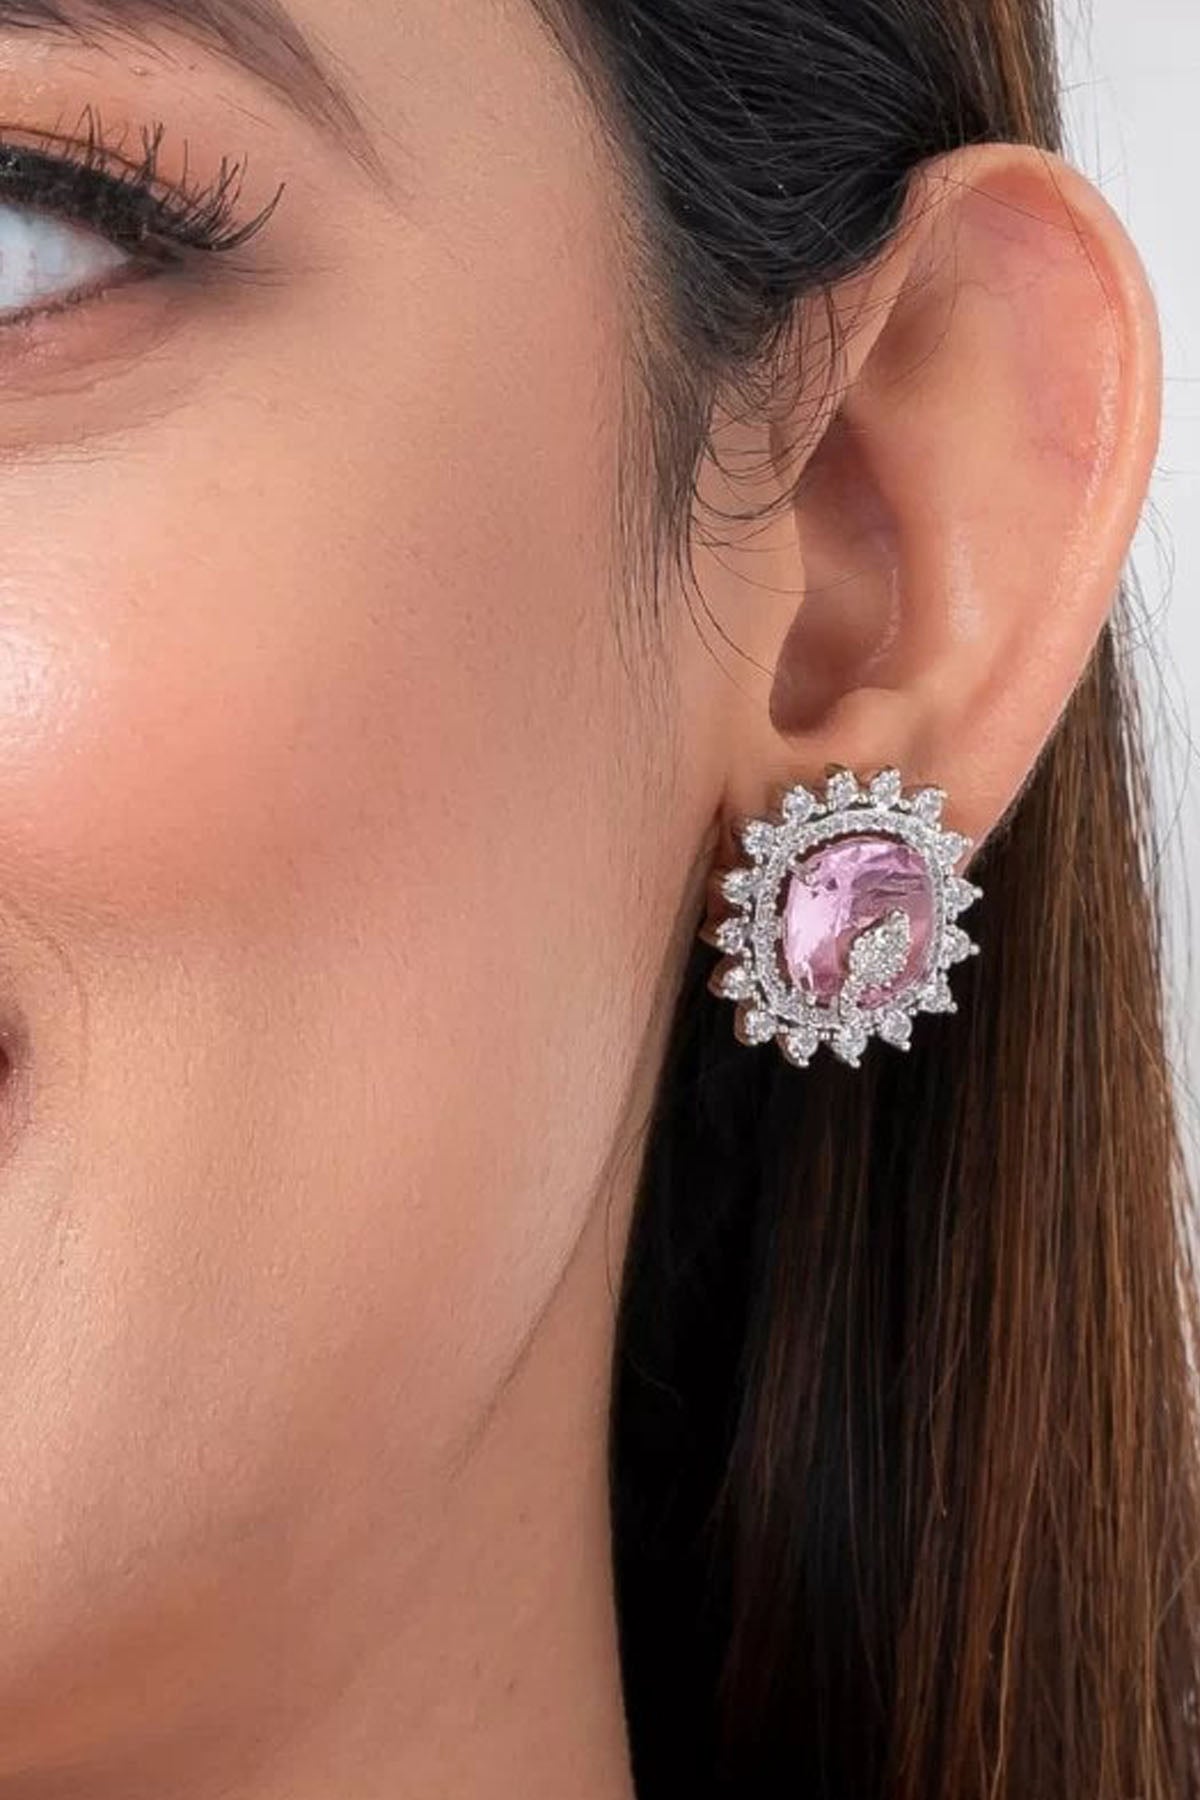 Pink Crystal Stud Earrings of Brand Putstyle Available online at ScrollnShops